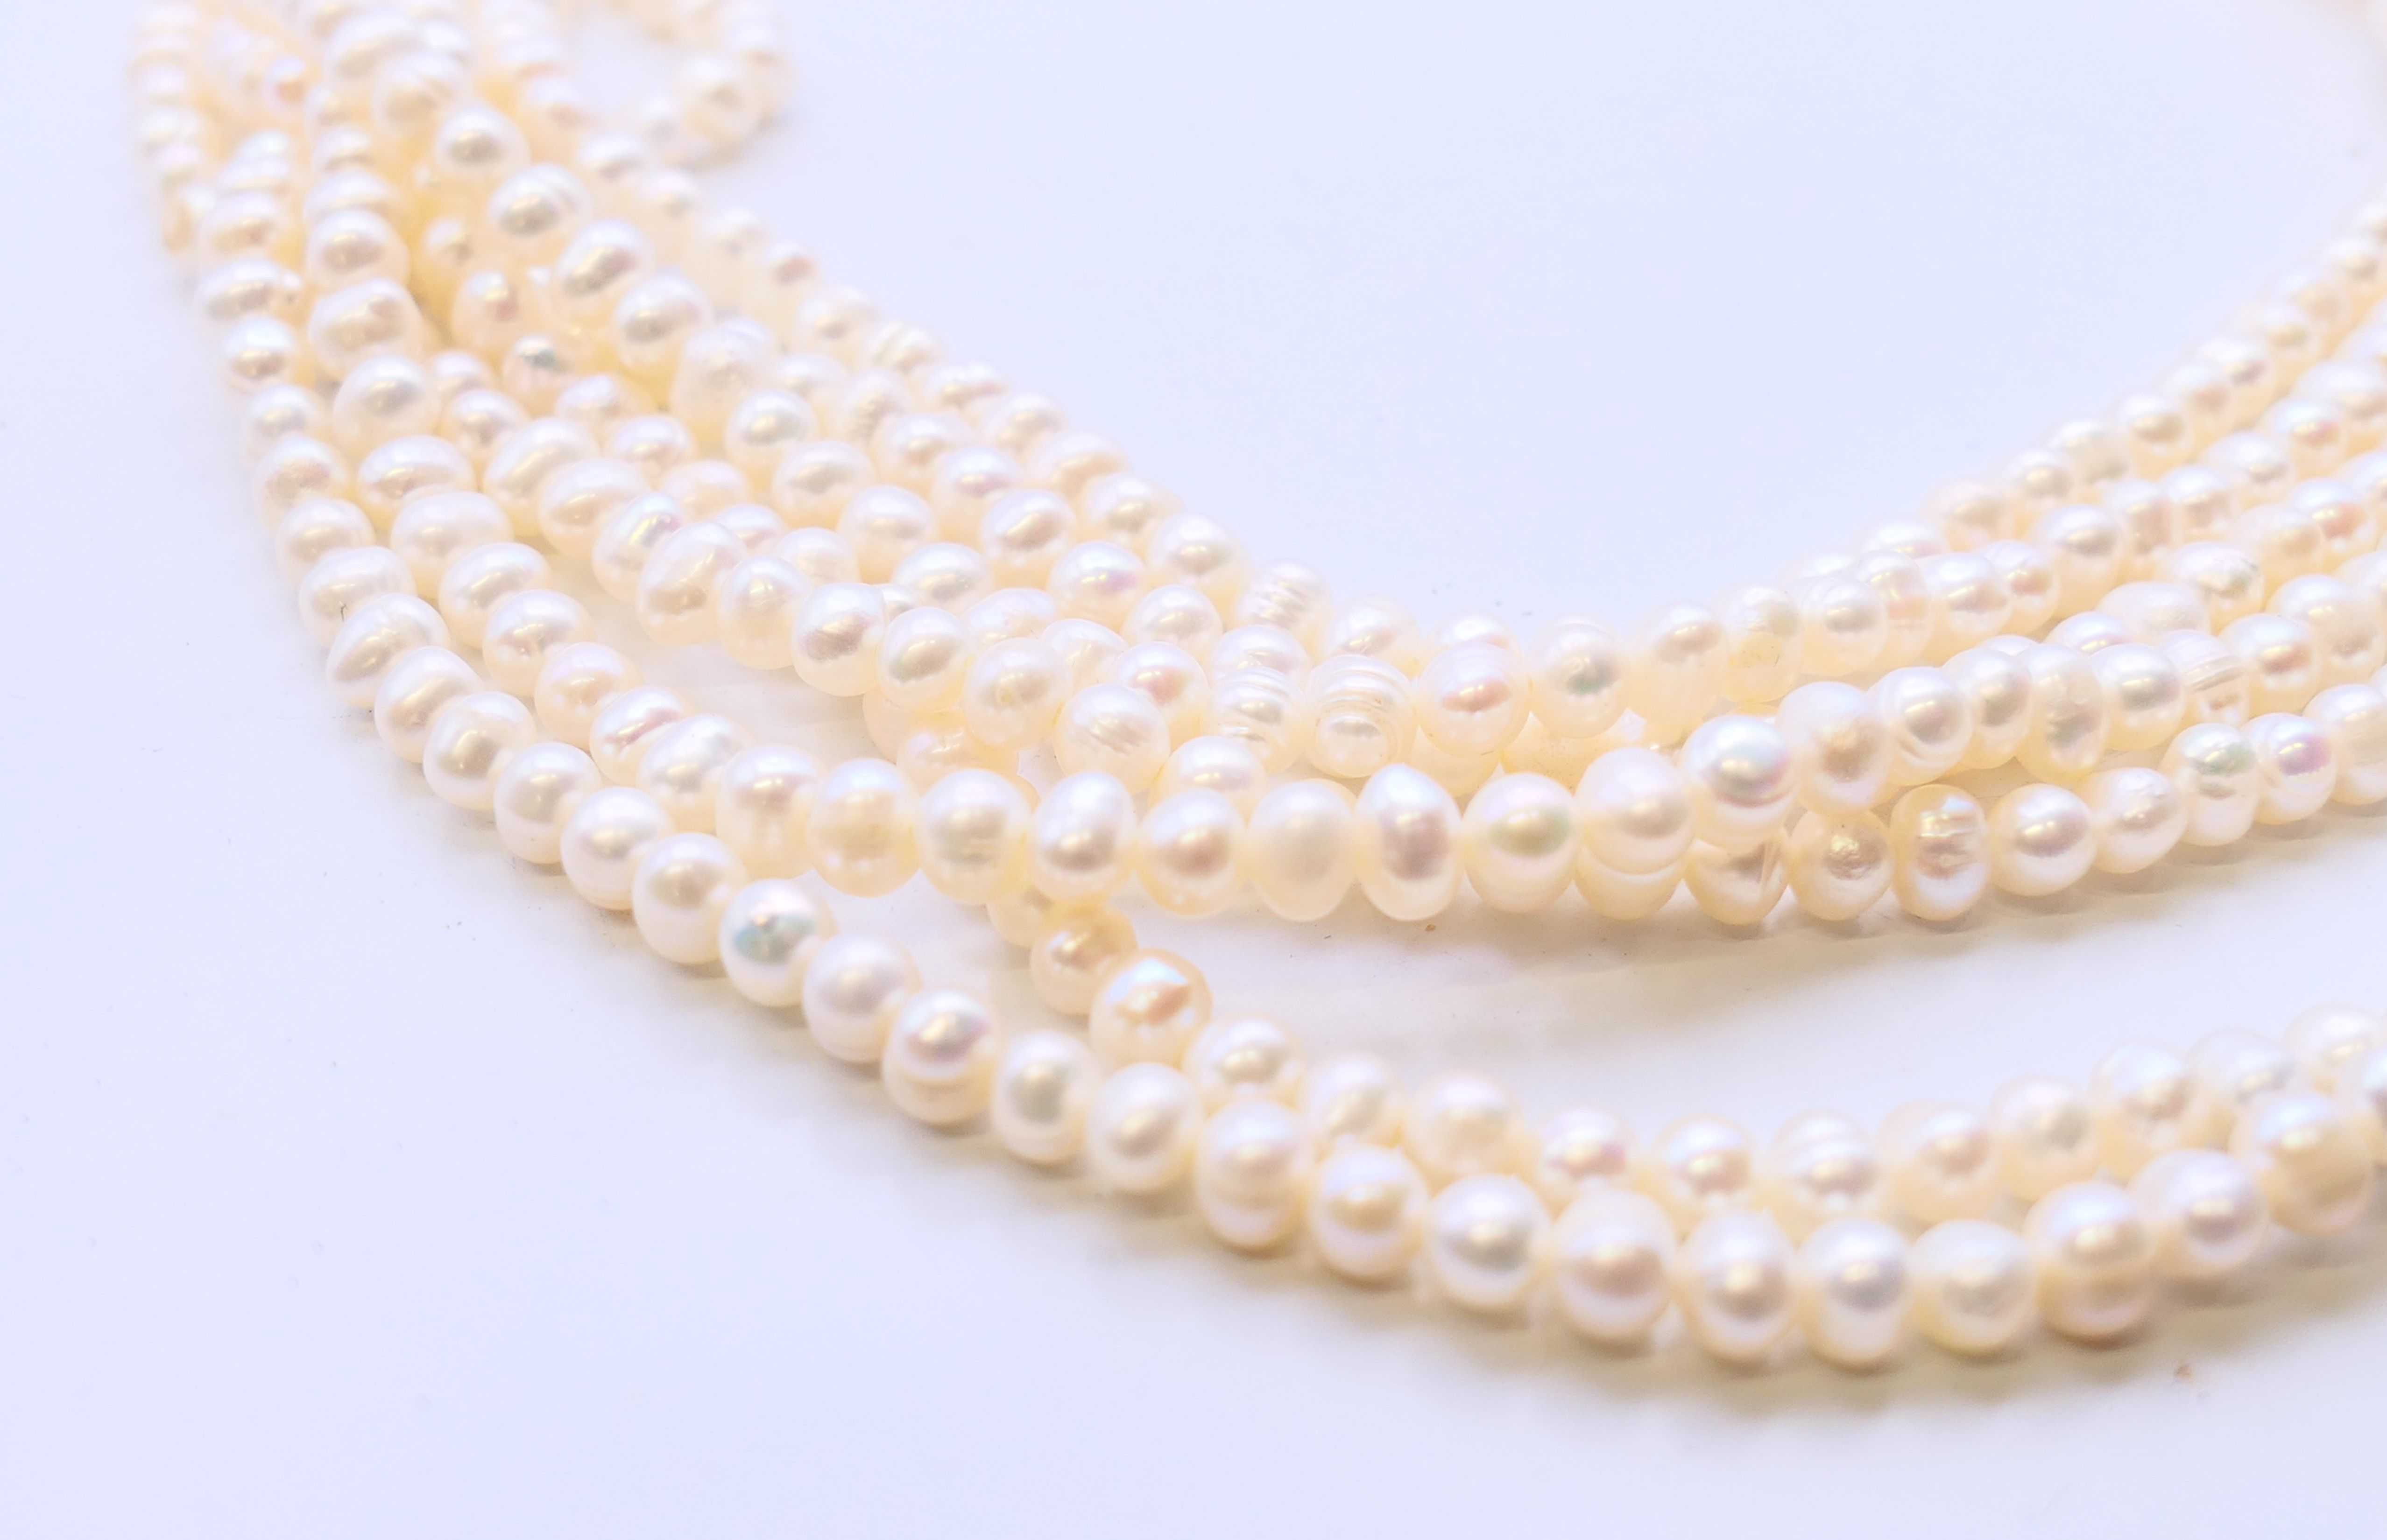 An Aska six-string pearl necklace. Approximately 46 cm long. - Image 2 of 3